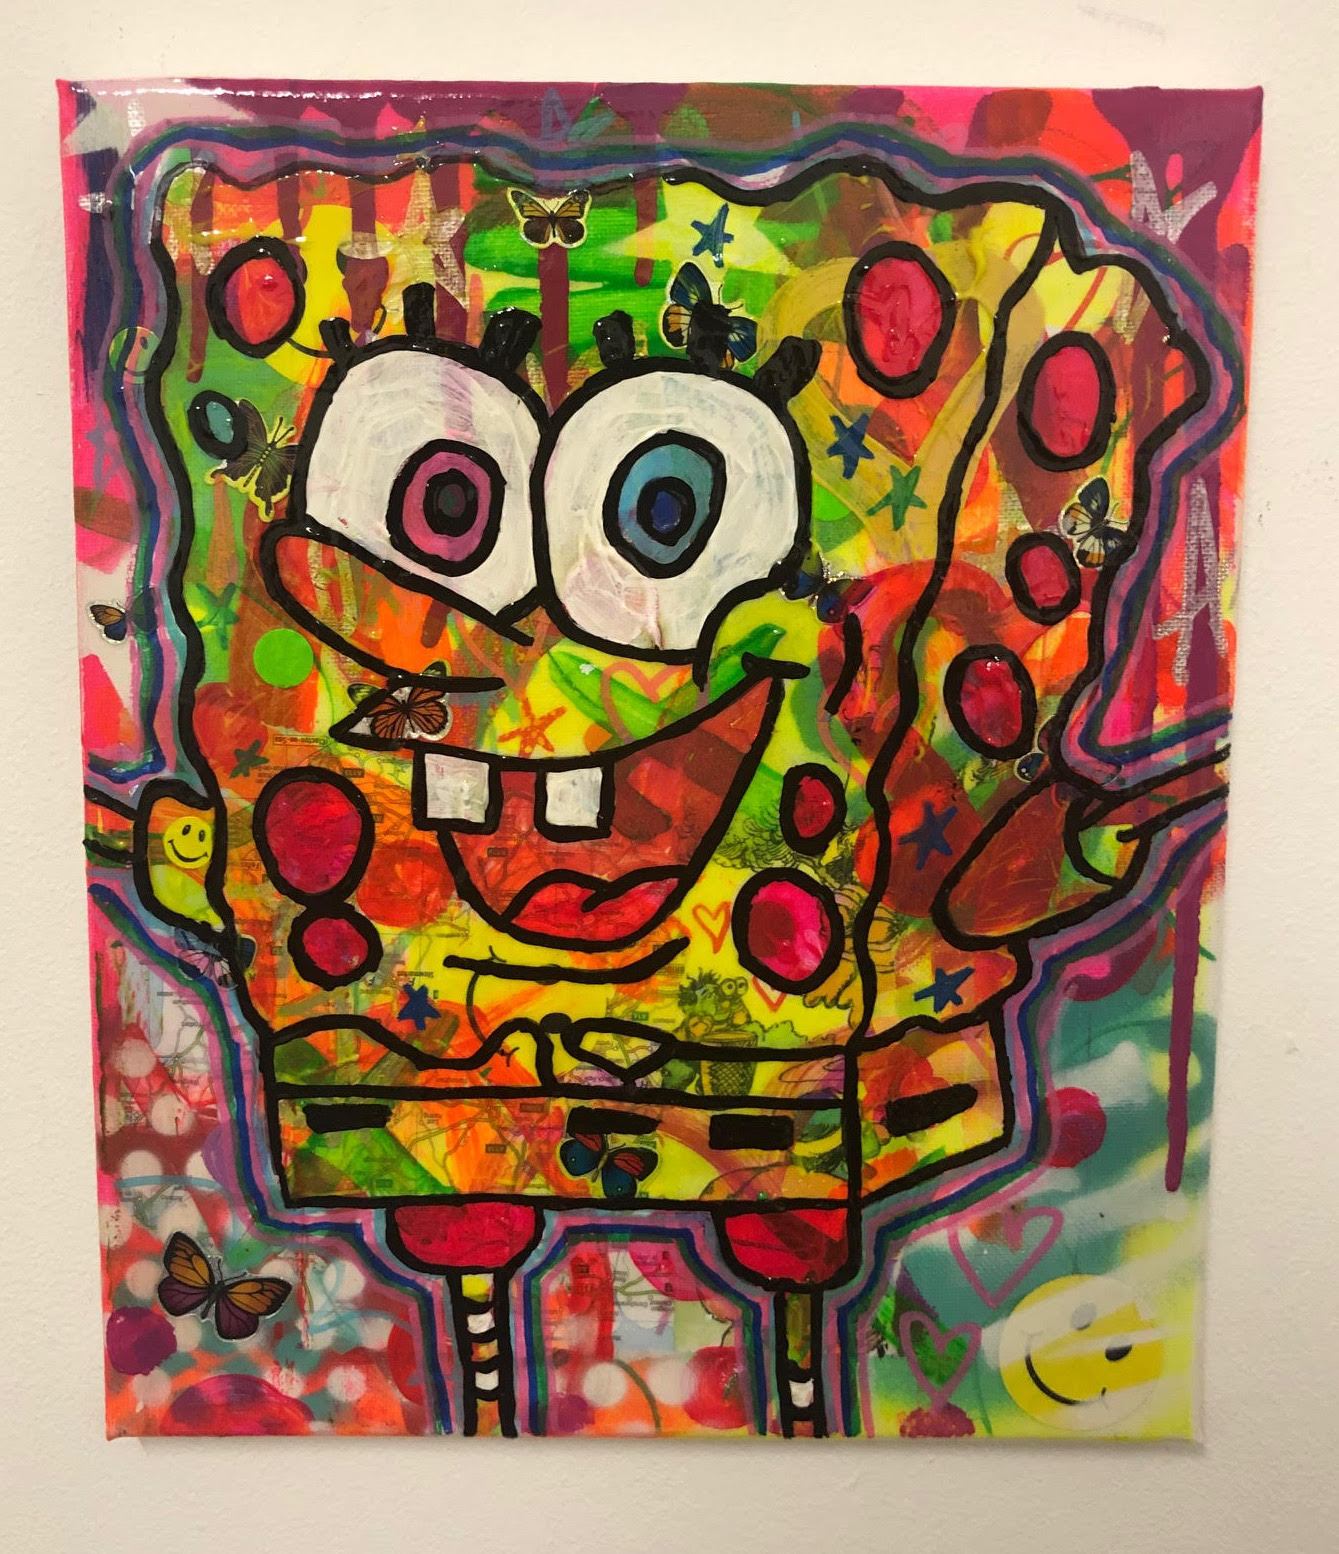 Psychedelic party bob by Barrie J Davies 2019, Mixed media on Canvas, 20cm x 25cm, Unframed. Barrie J Davies is an Artist - Pop Art and Street art inspired Artist based in Brighton England UK - Pop Art Paintings, Street Art Prints & Editions 